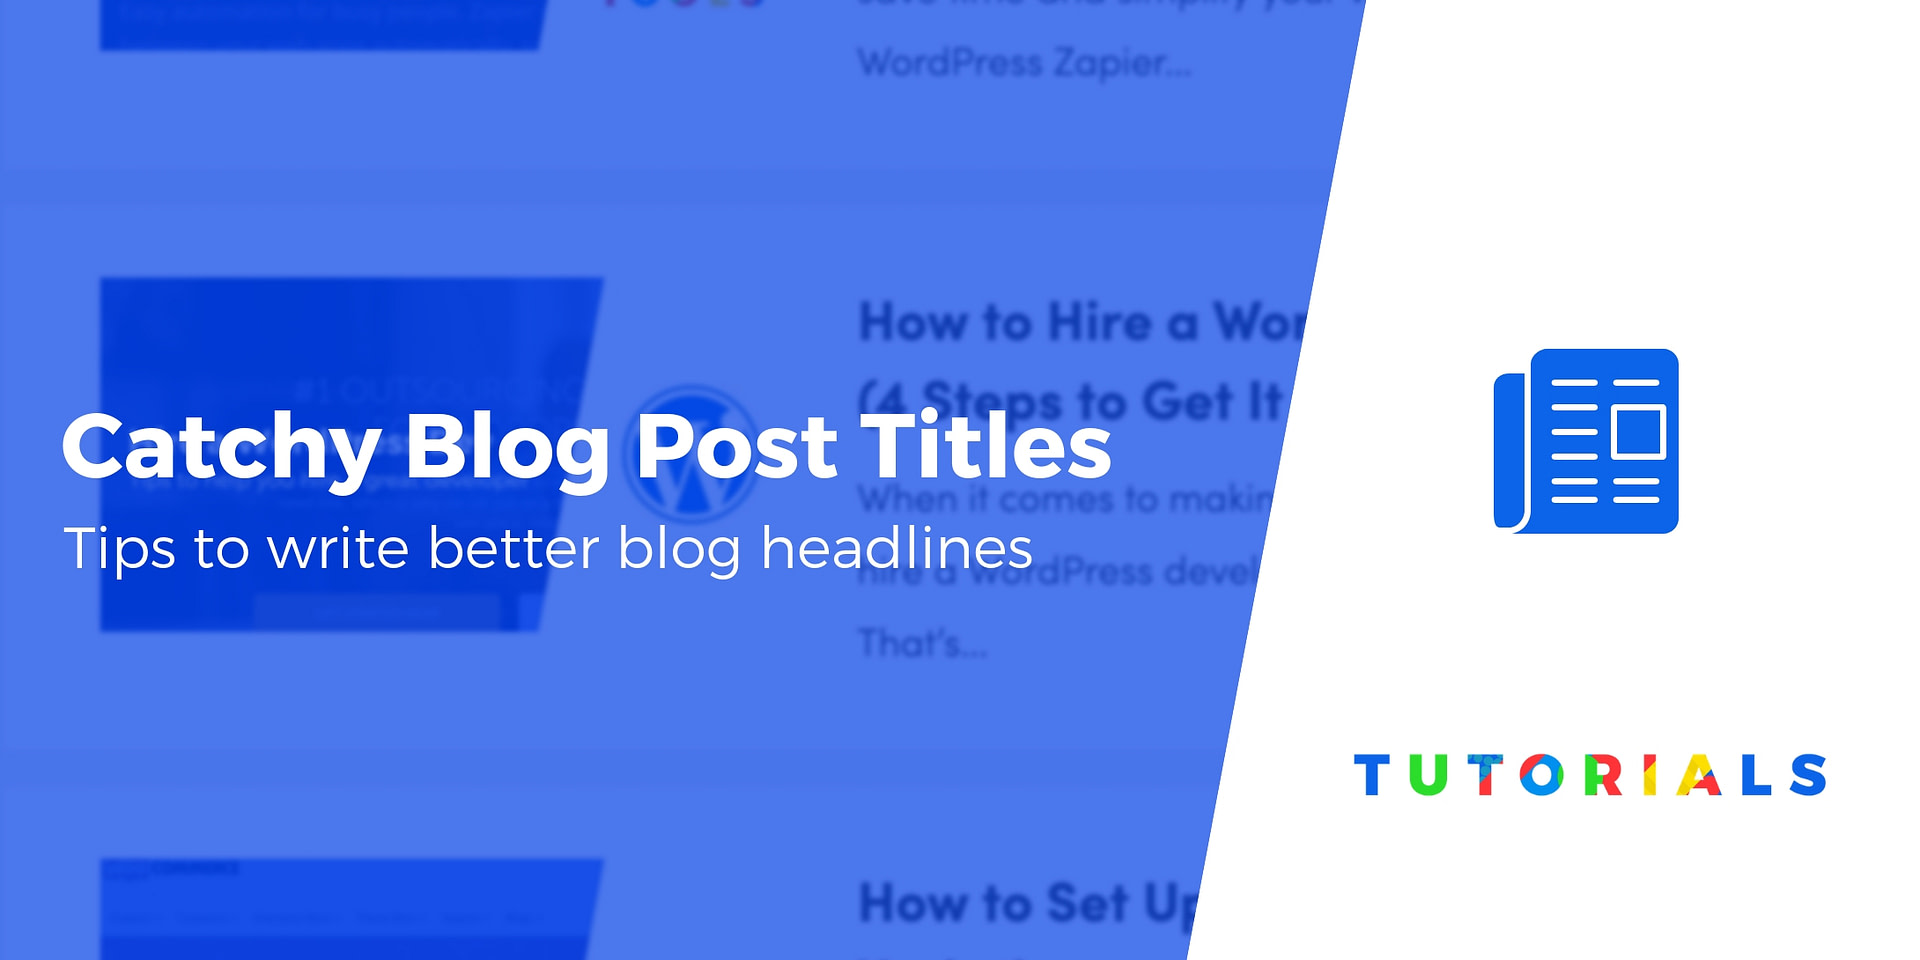 8 Tips to Write Catchy Blog Post Titles that Get More Clicks